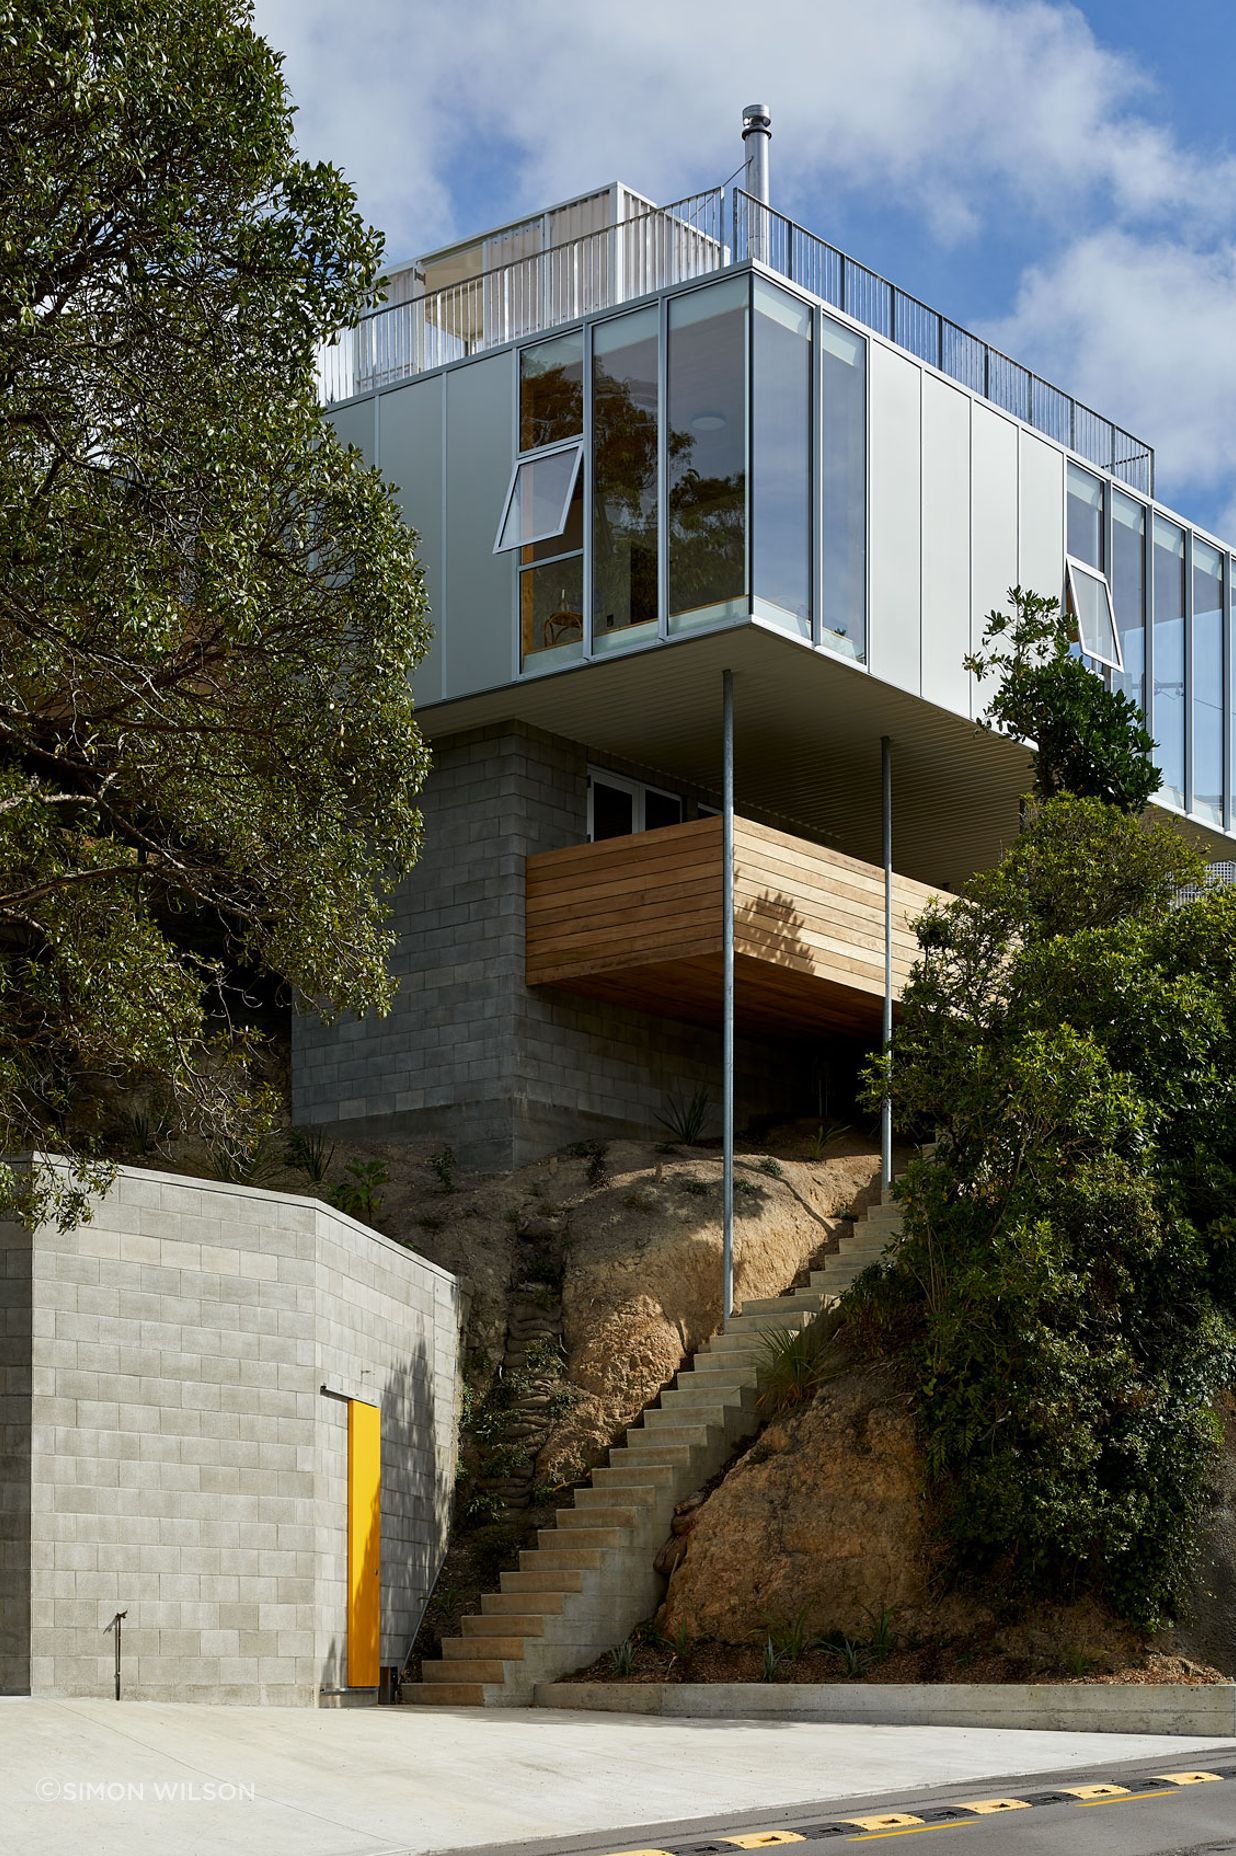 The family home designed by Patchwork Architecture. It was a tricky site, but rocky, which provided a good foundation. “So it's almost totally out of the ground. It's barely dug into the hillside at all,” says Patchwork Architecture's Ben Mitchell-Anyon.